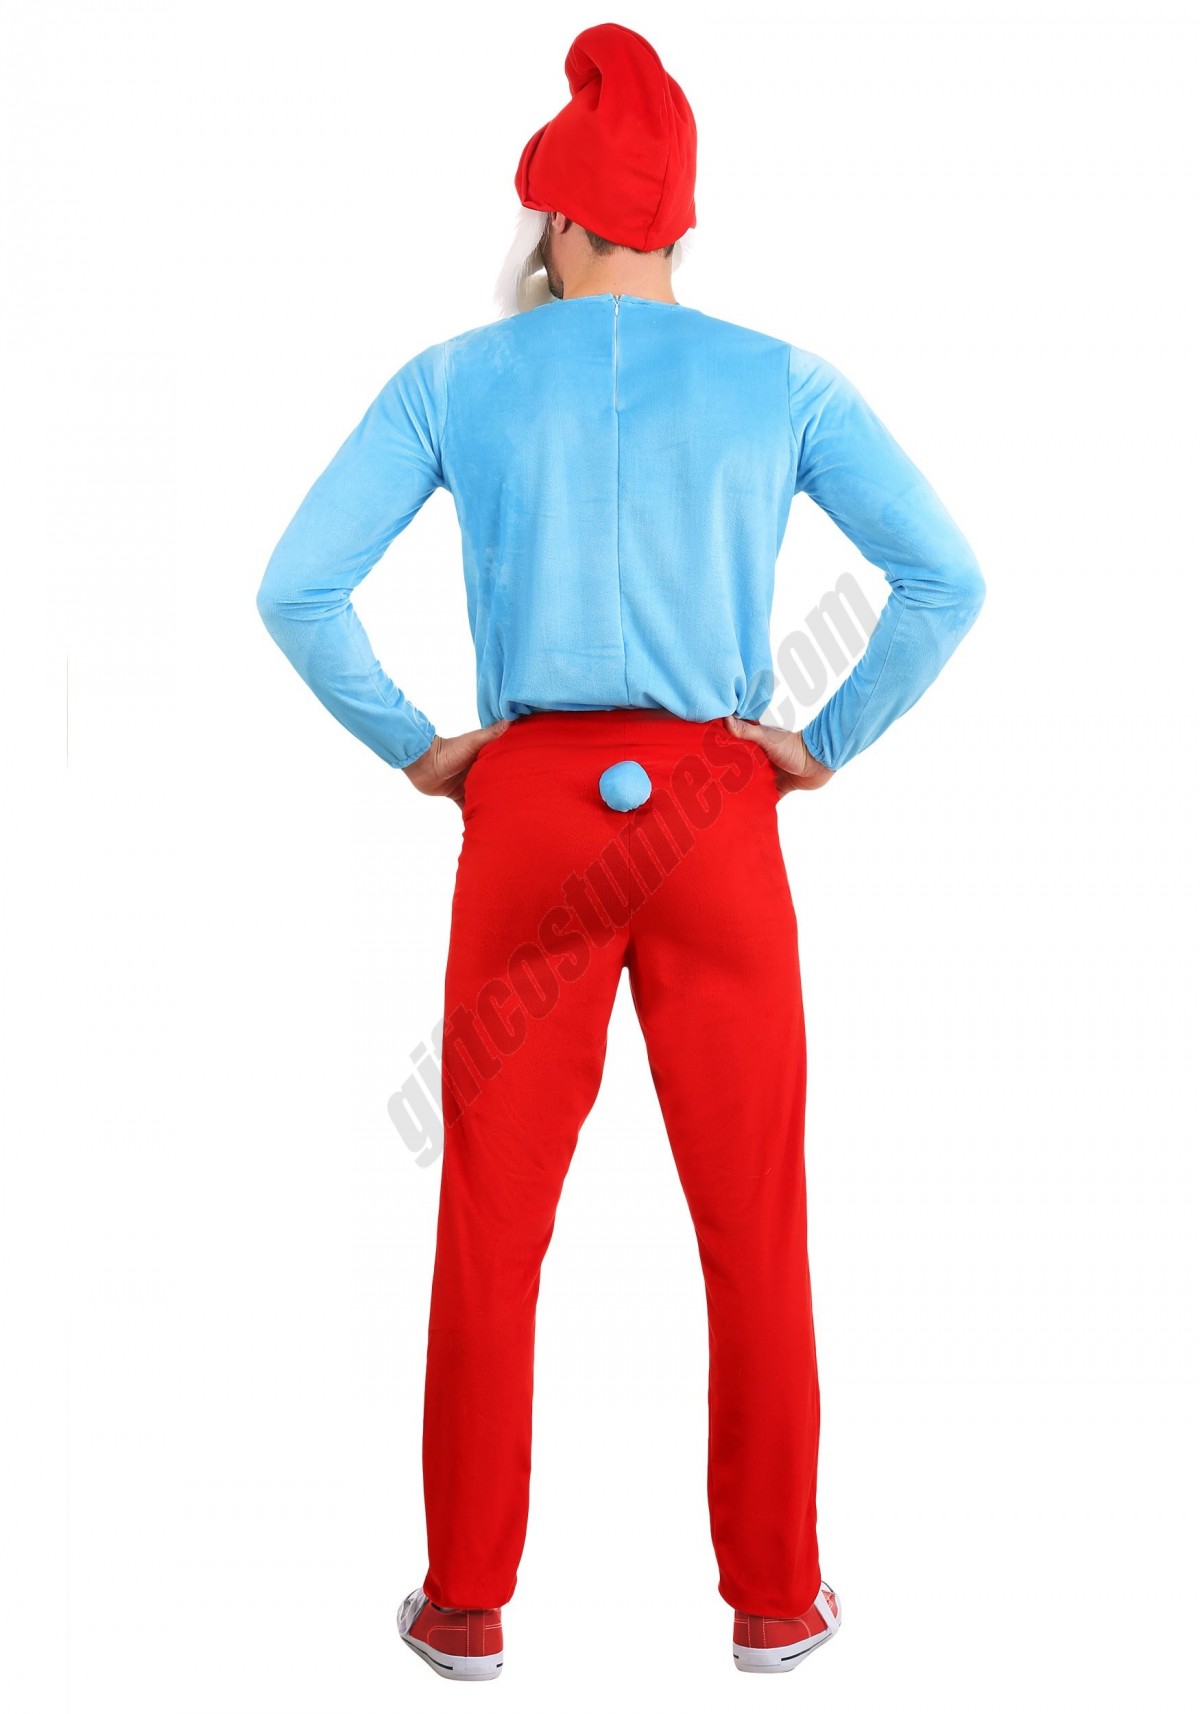 Plus Size Papa Smurf Costume for Men Promotions - -1